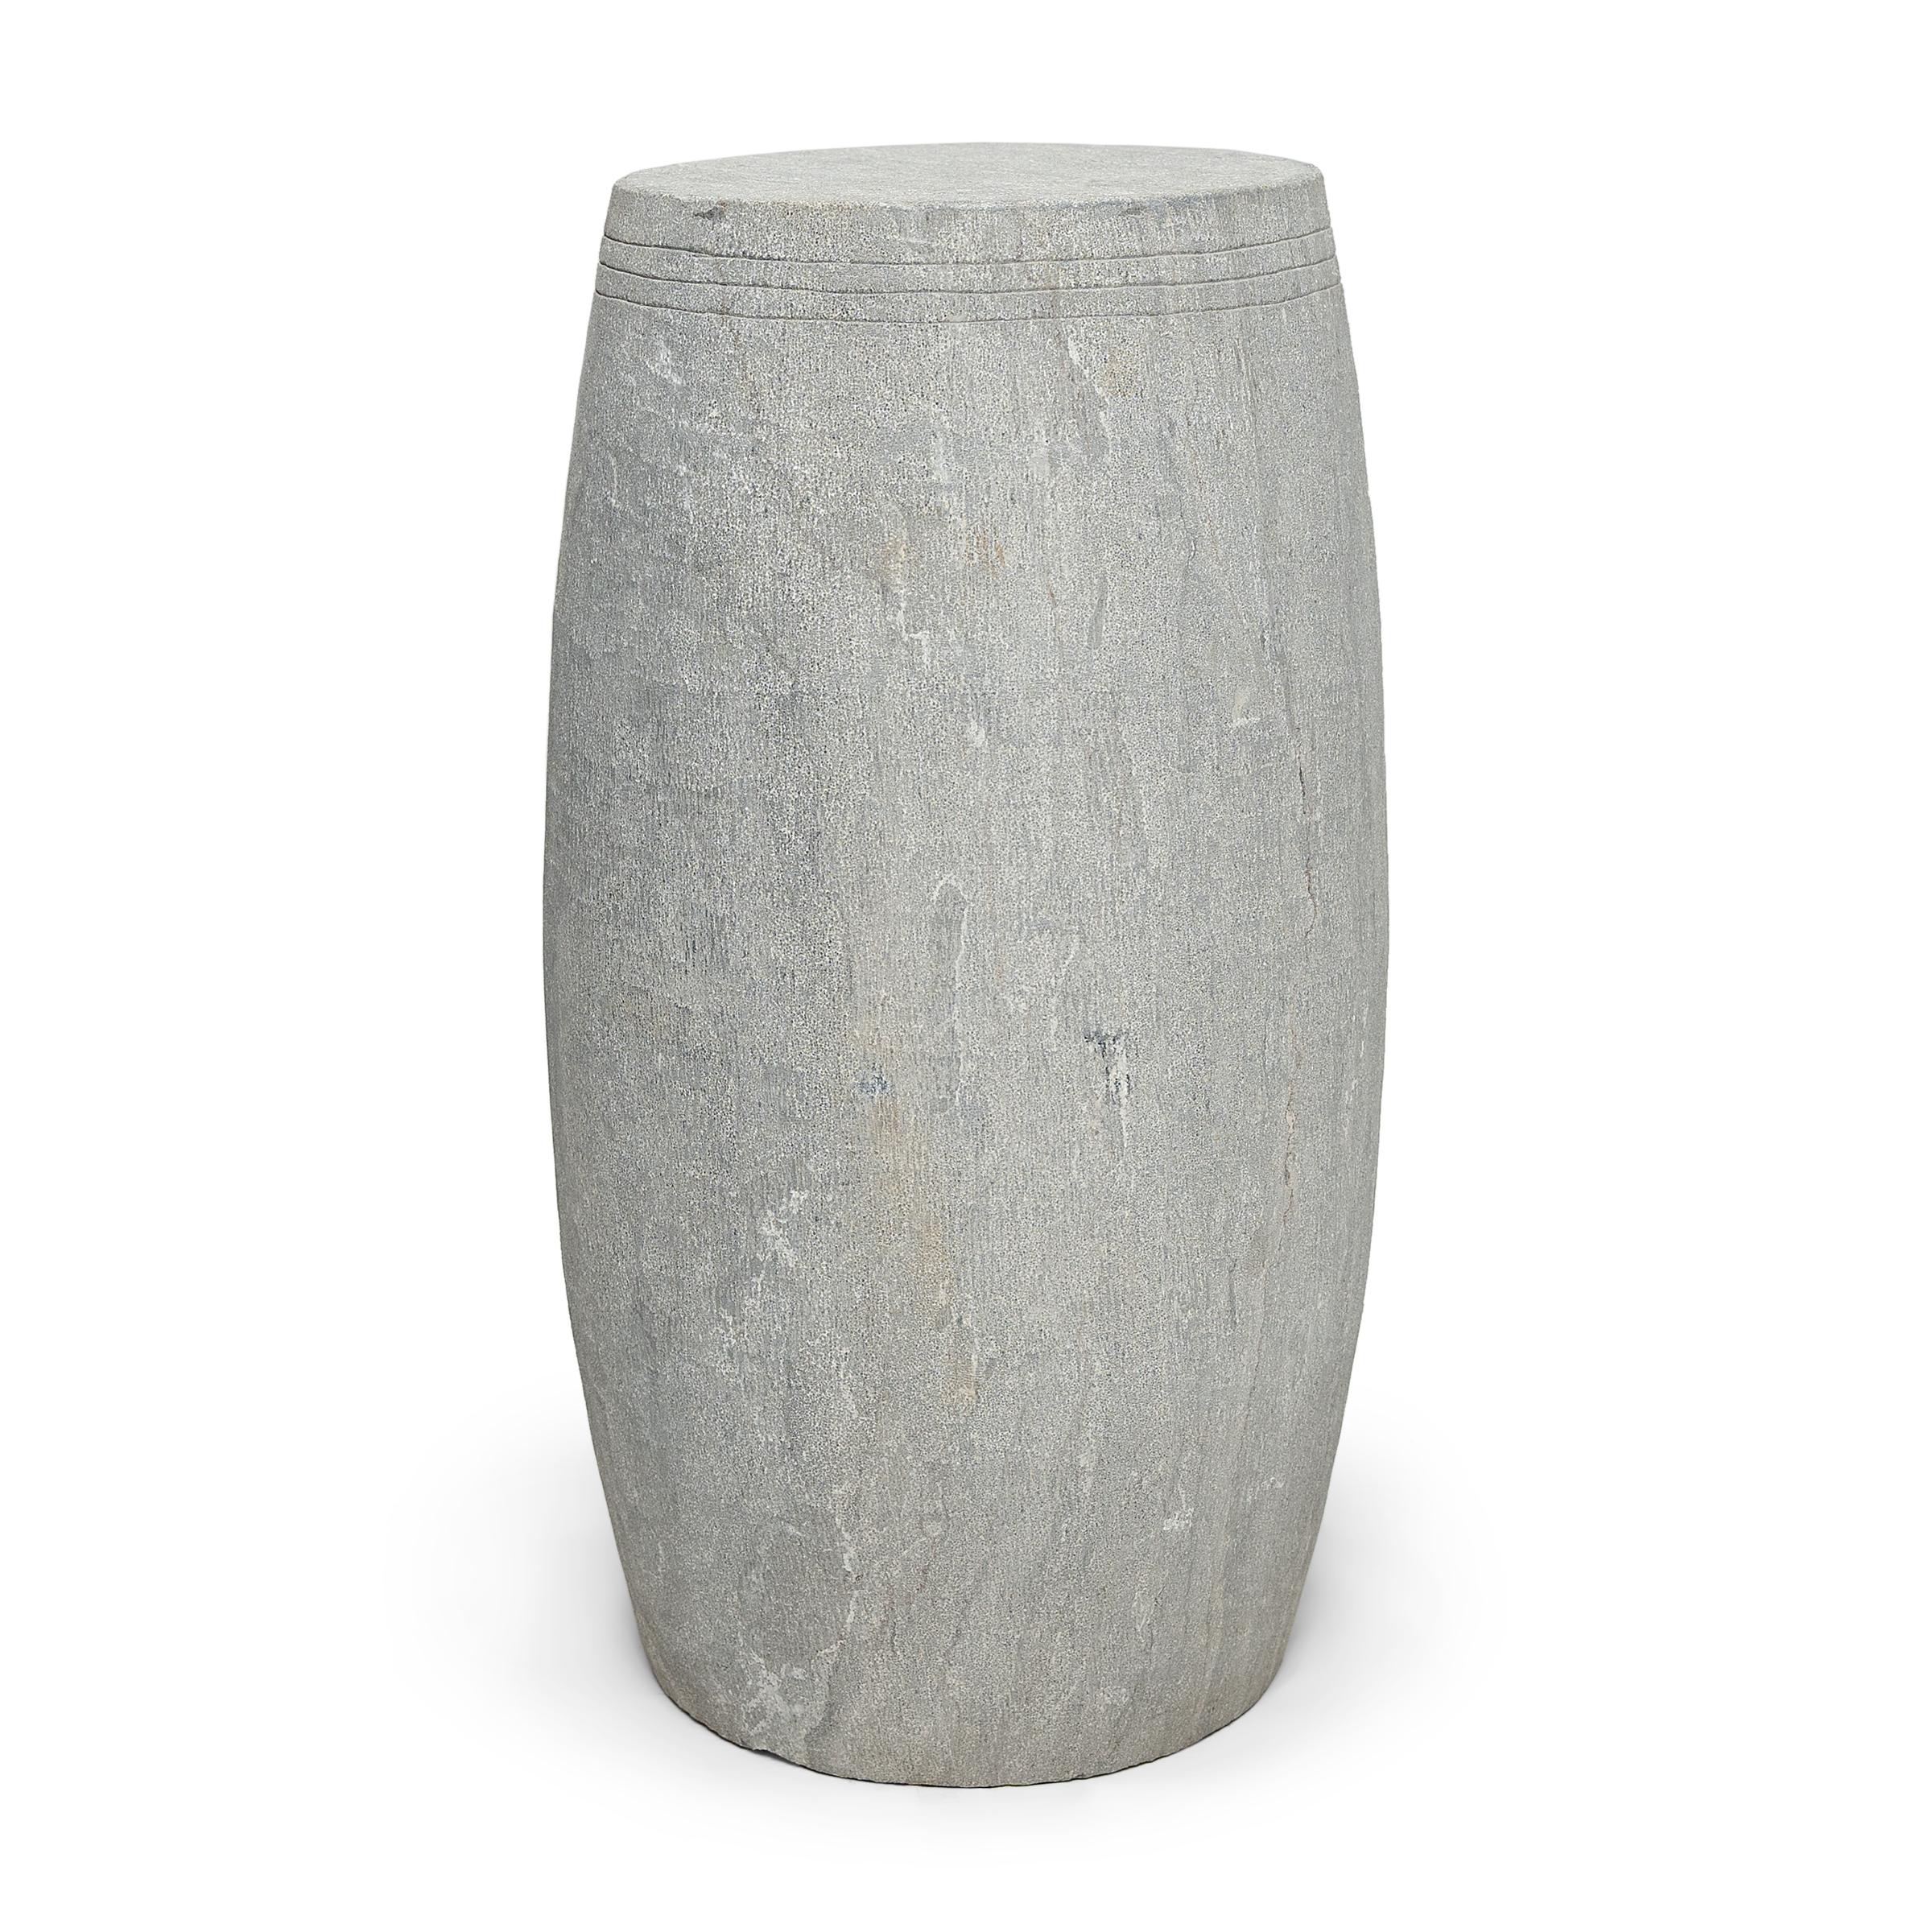 This narrow drum stool was carved from a solid block of limestone with a minimalist tapered design. The stool is subtly etched with thin grooves around the top, suggestive of the lines drawn by stretched hide on an actual drum. Traditionally used as